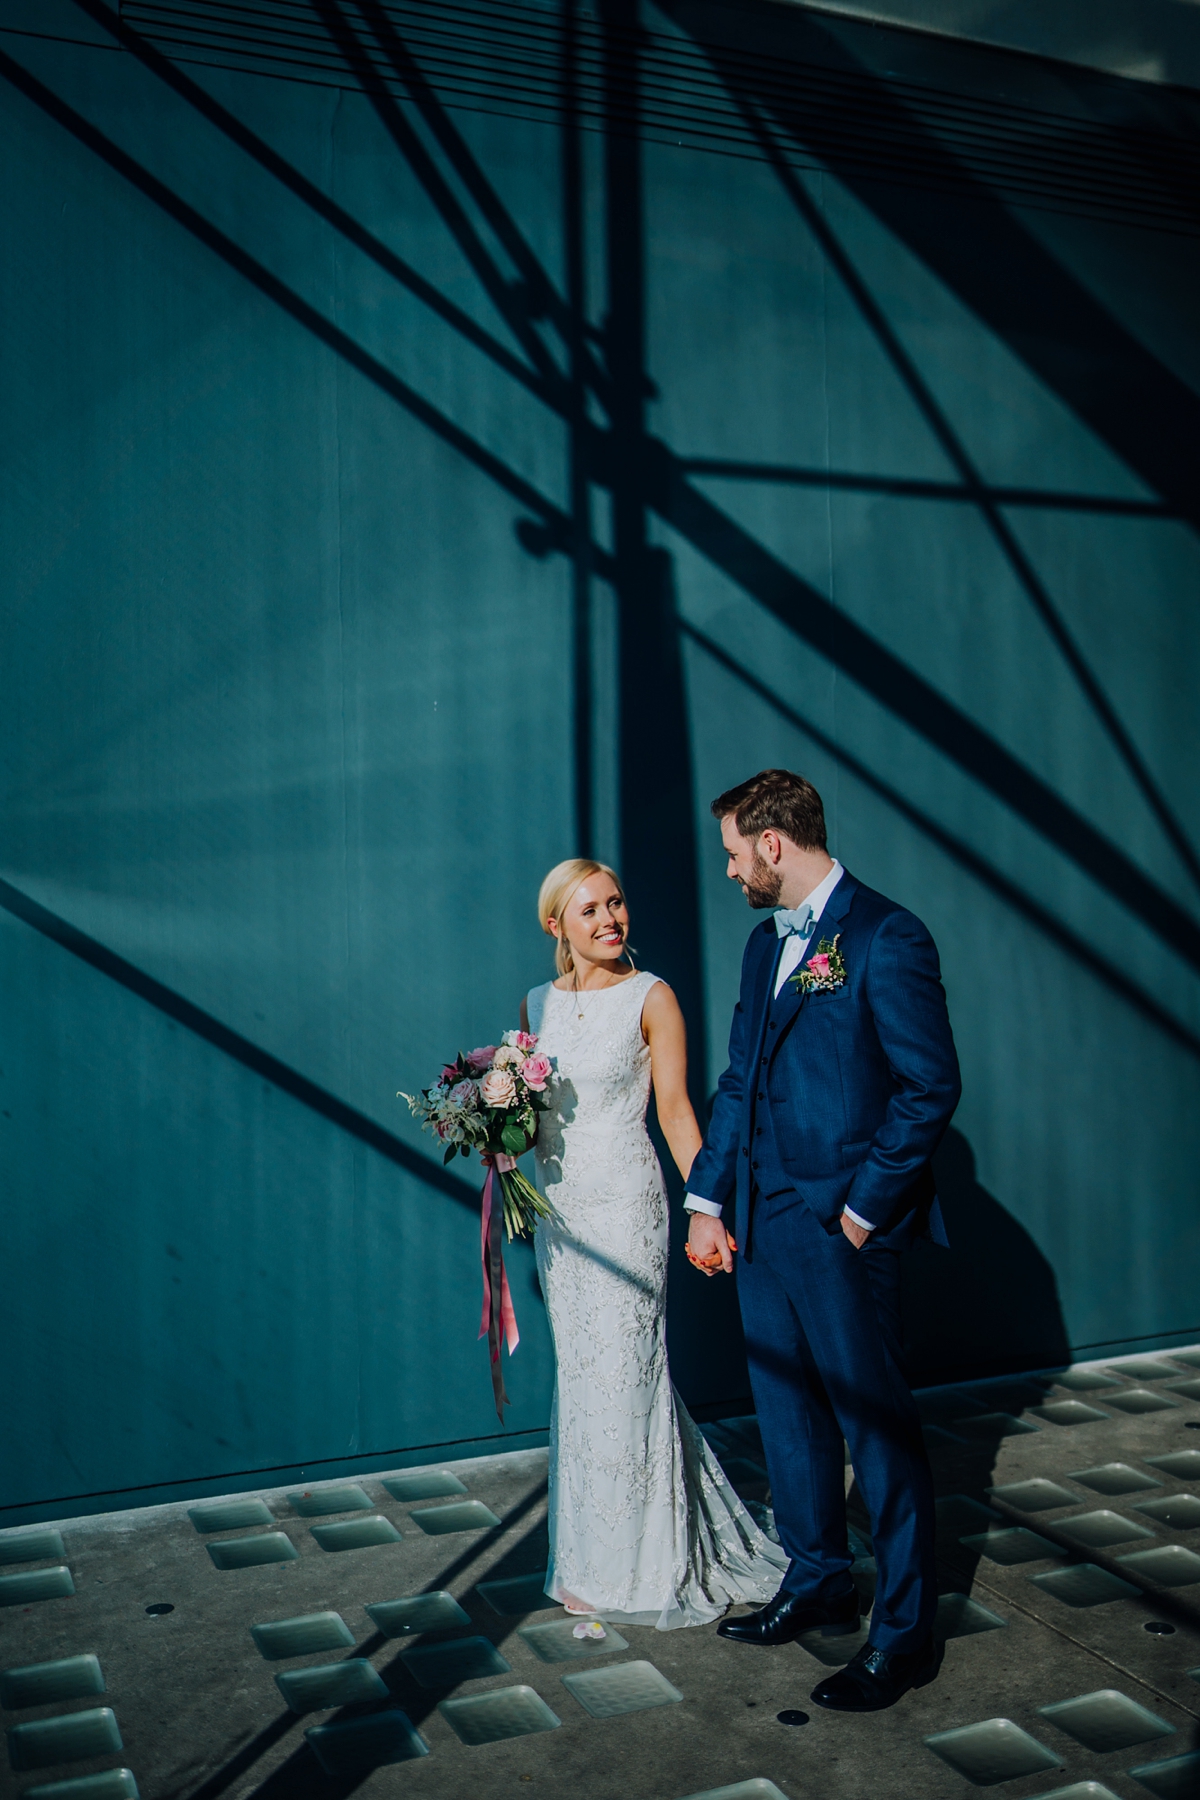 A Monsoon wedding dress for a colourdful and cultured Manchester city wedding 27